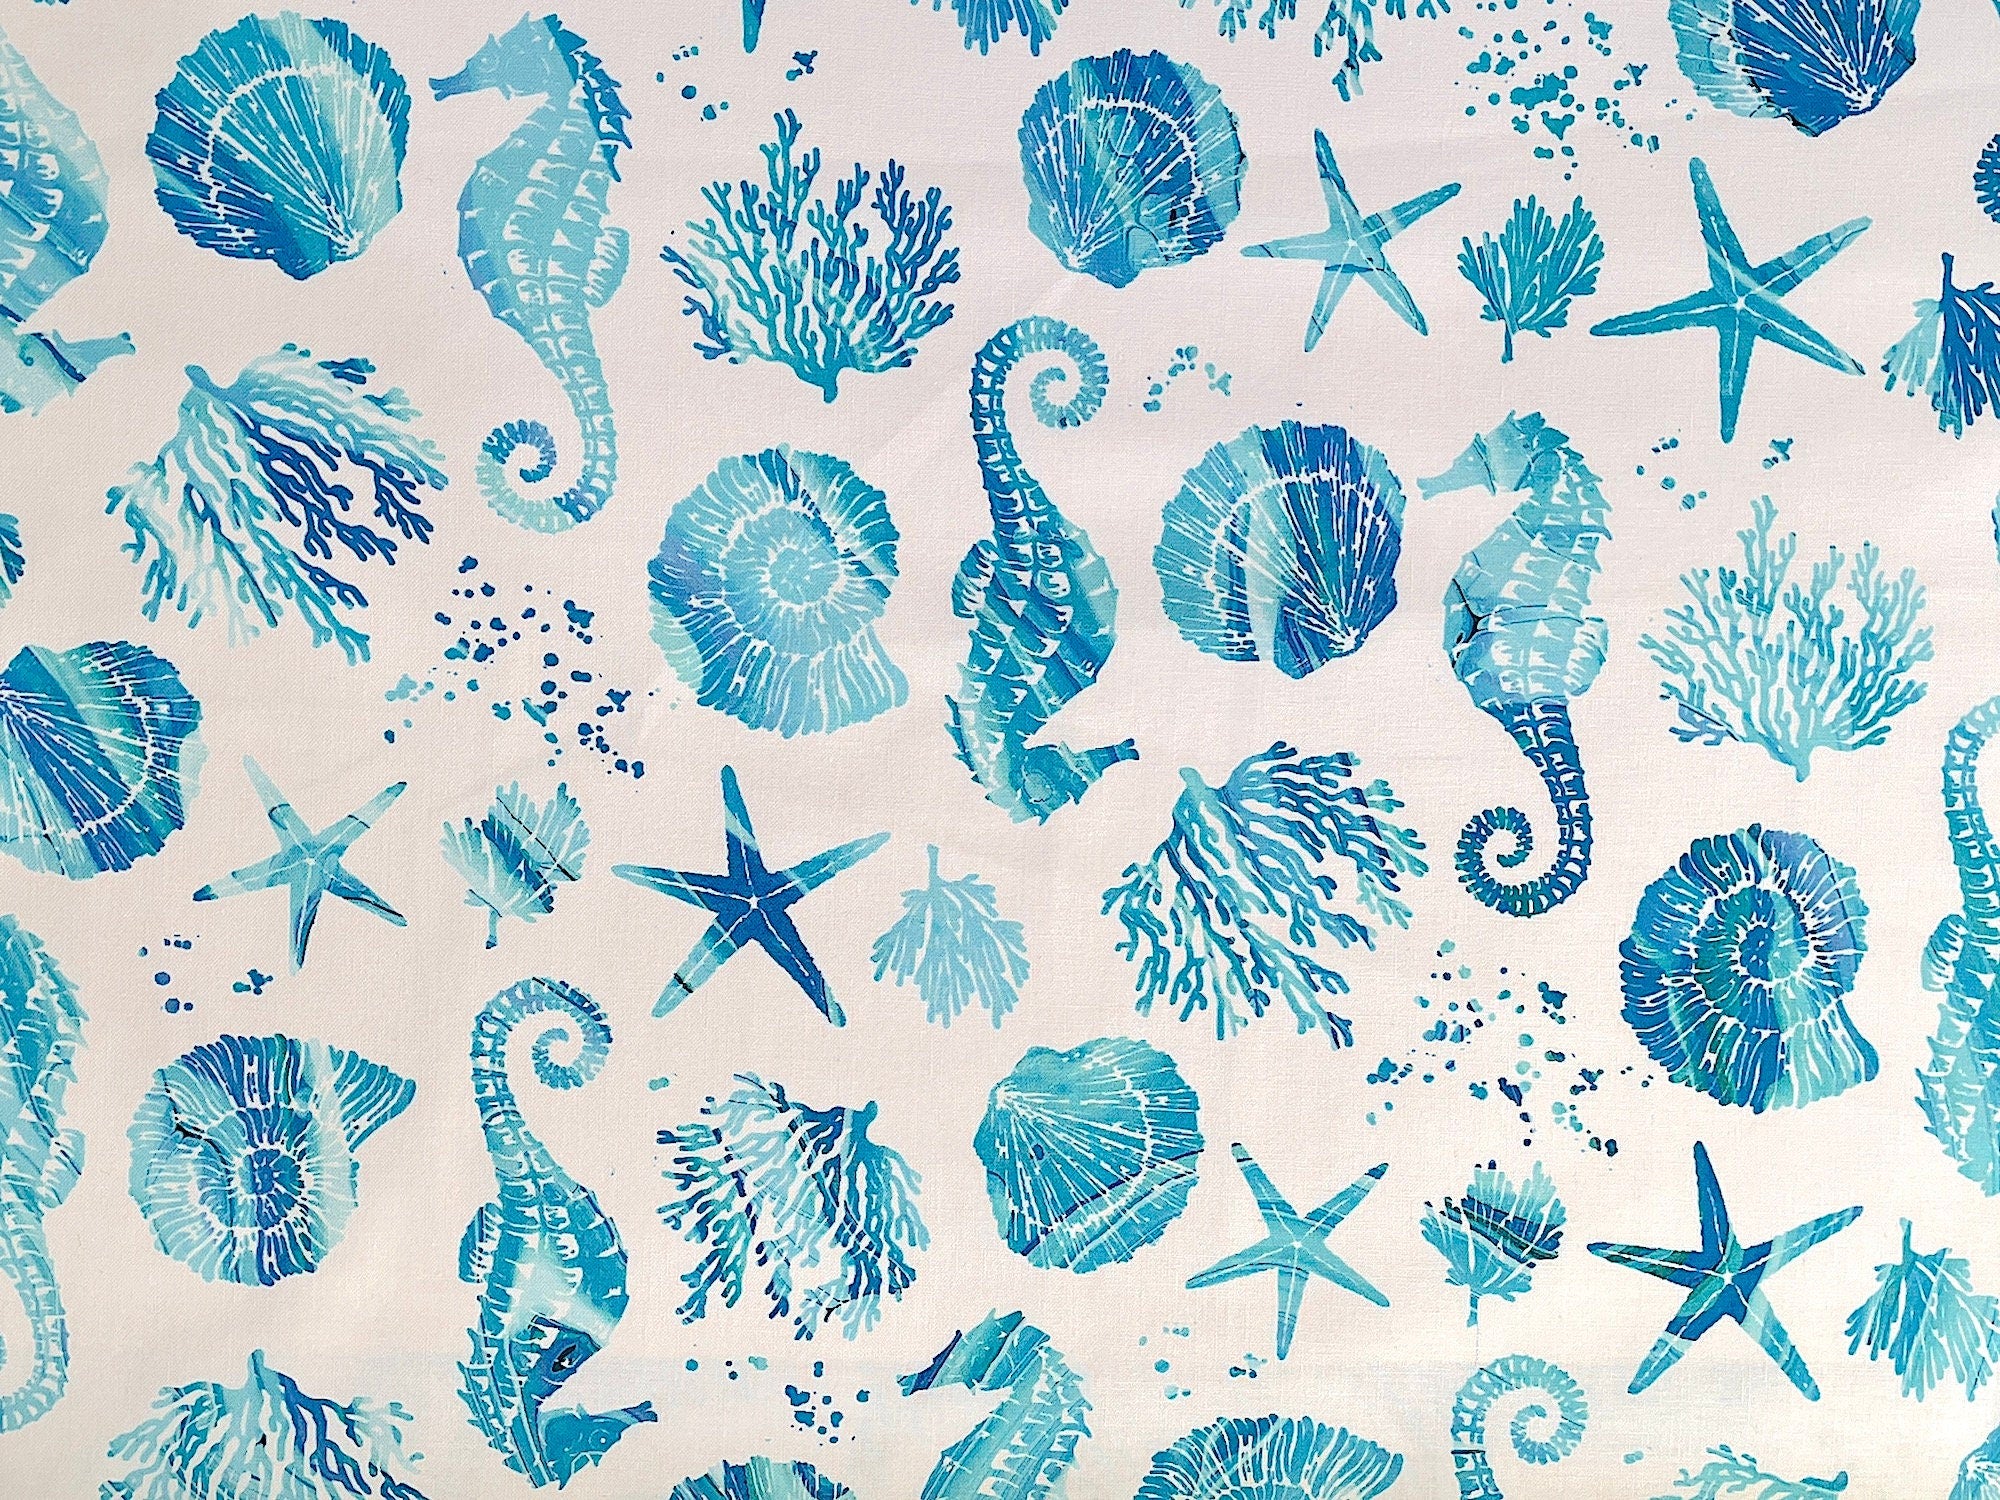 White cotton fabric covered with starfish, seahorses and sea shells.